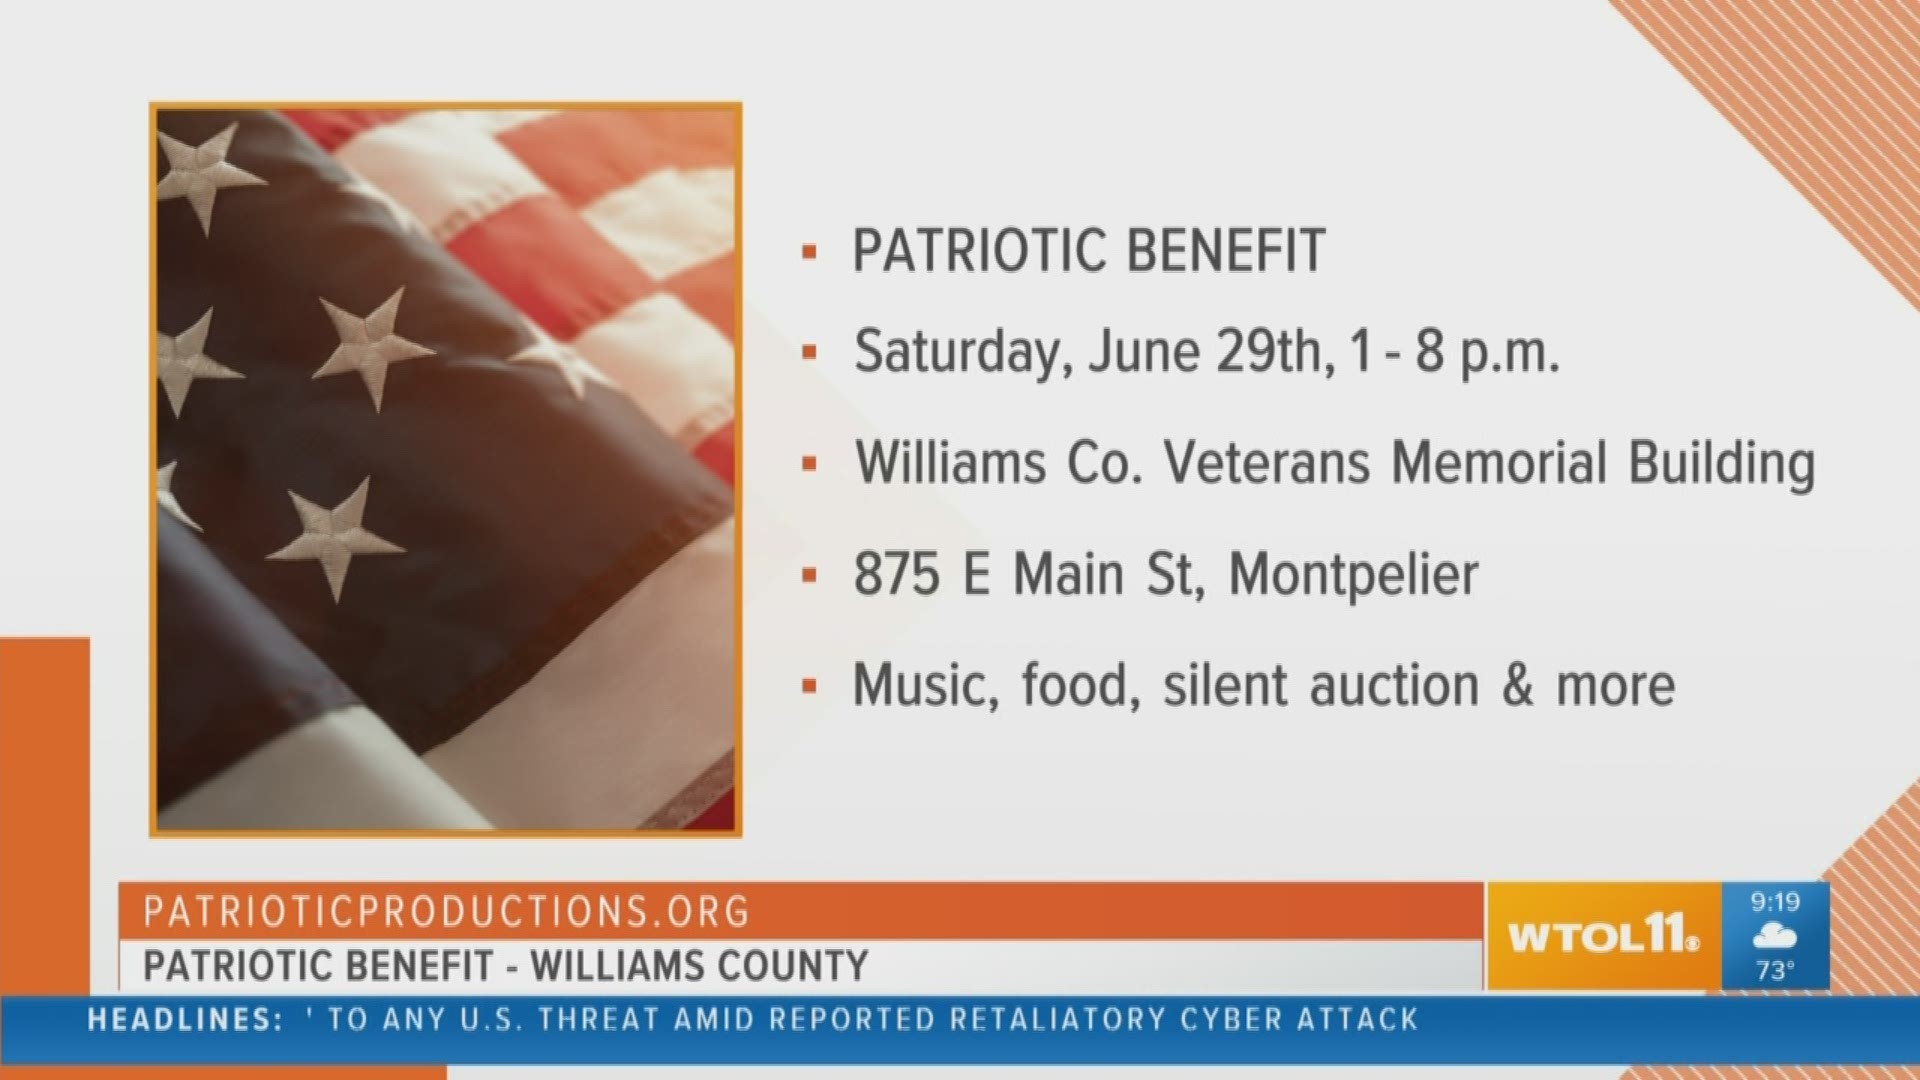 Check out the Patriotic Benefit in Williams County this weekend to honor those who have given their life in service to our country.